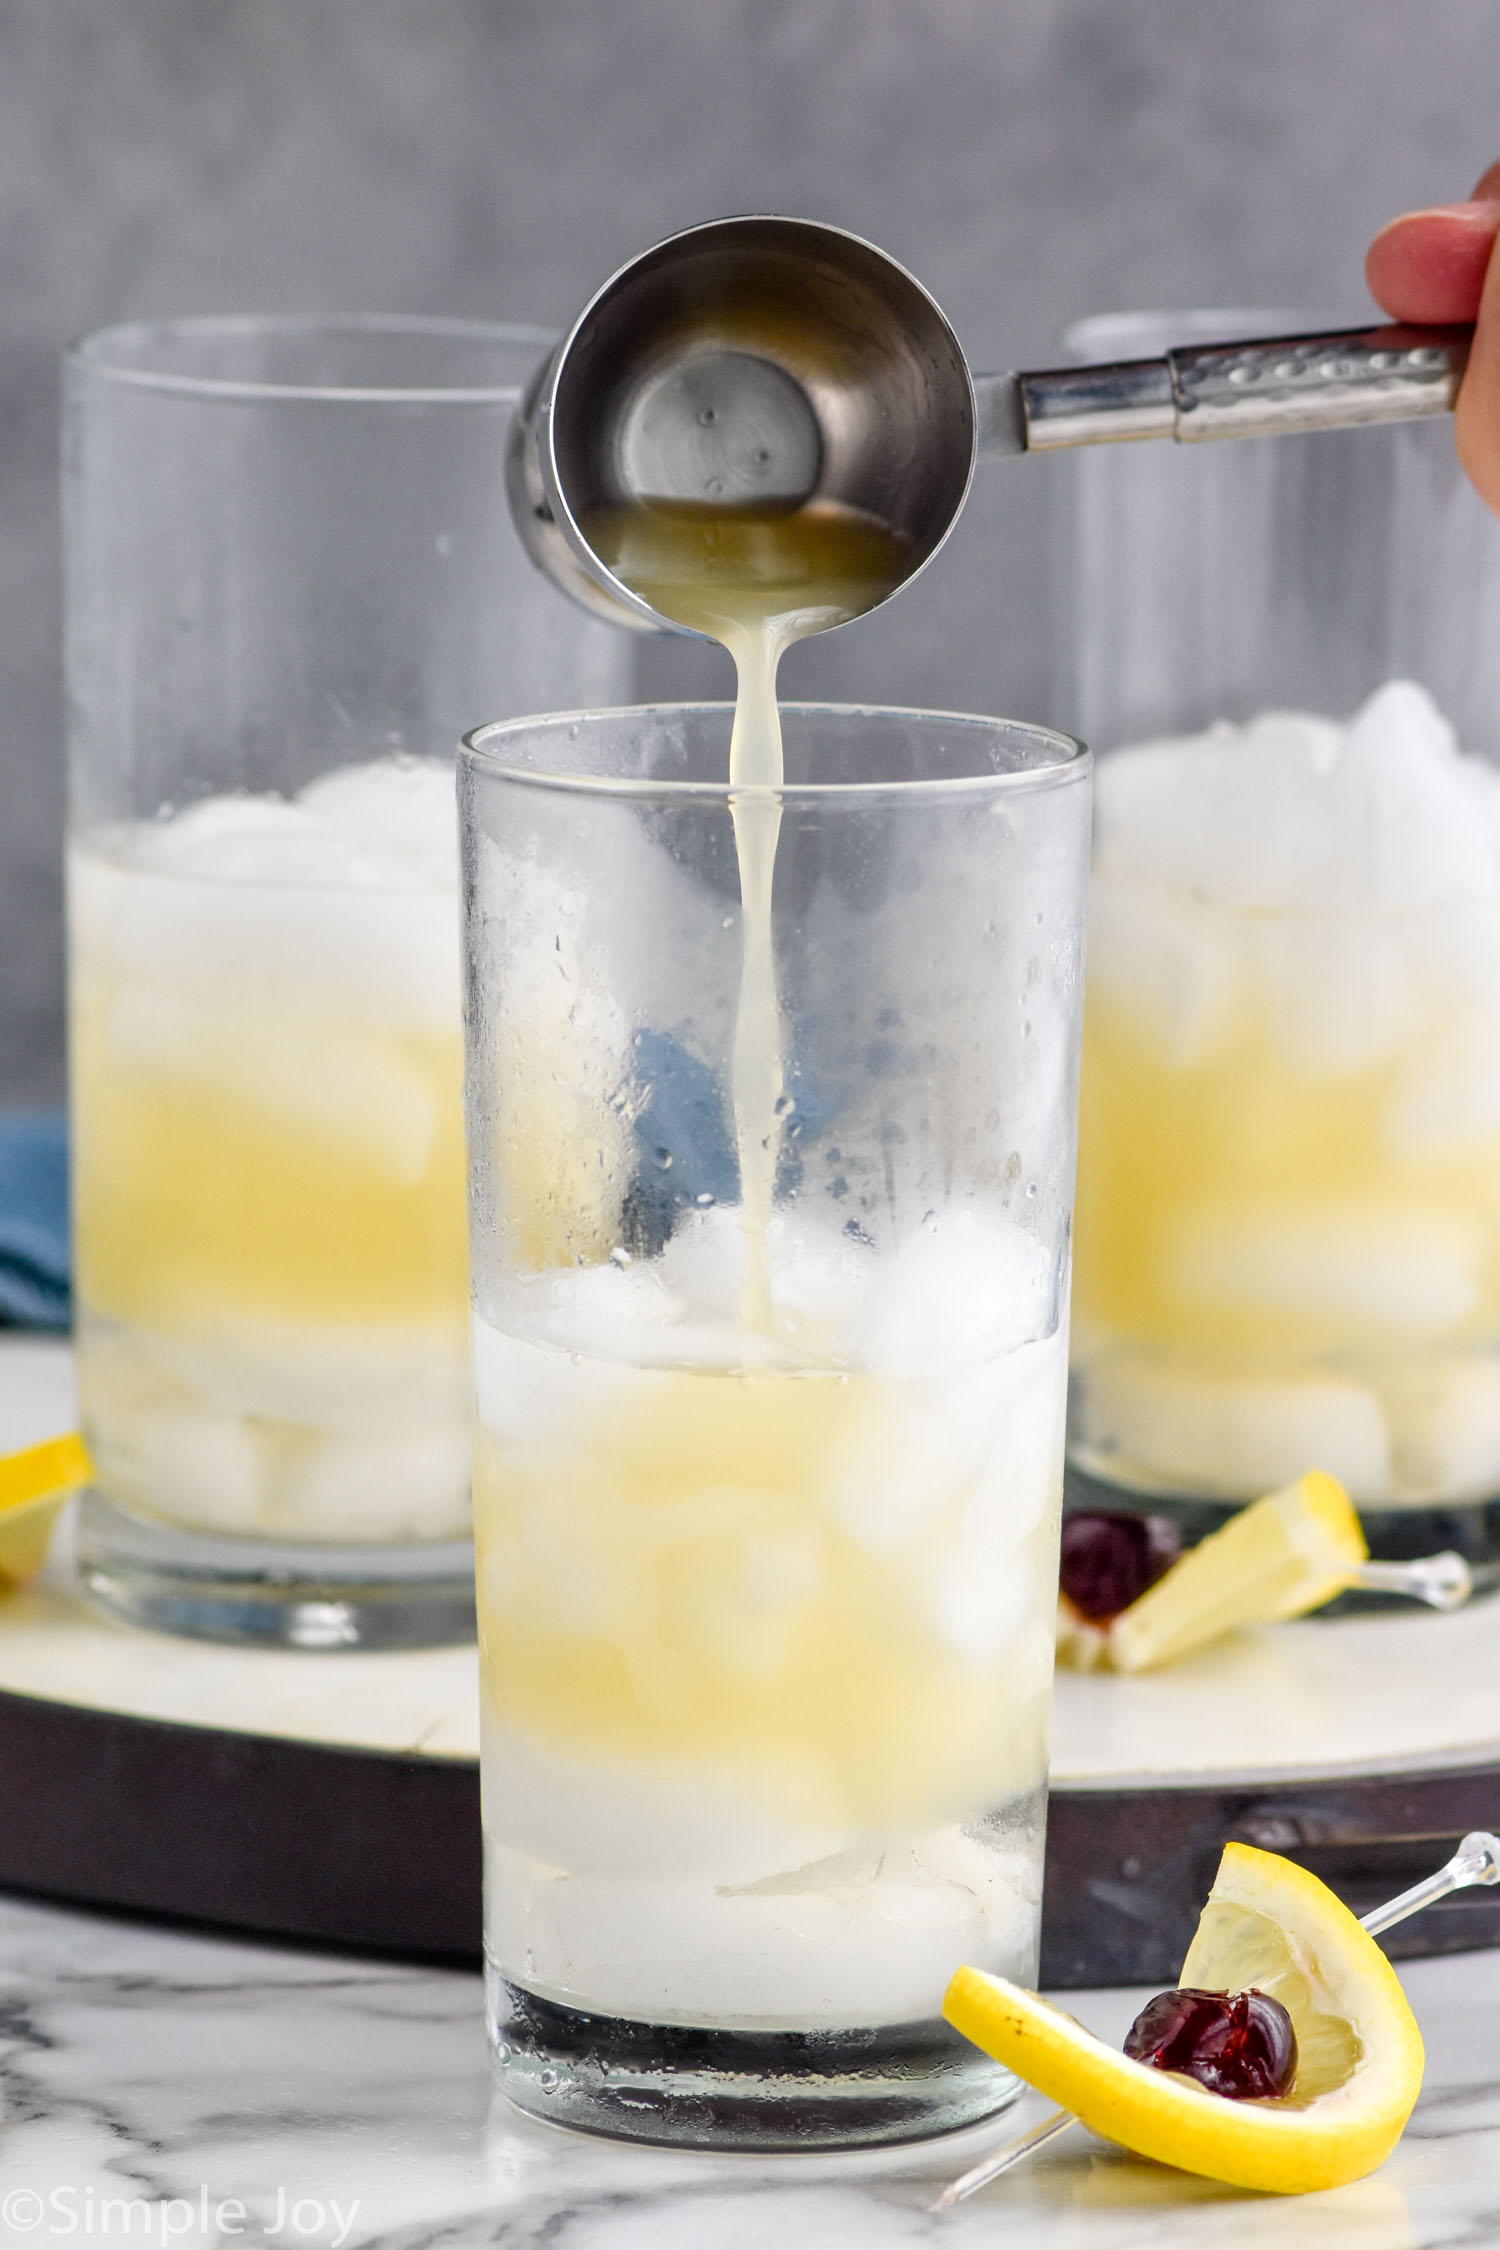 Man's hand pouring cocktail jigger of lemon juice into a glass of ice and Tom Collins ingredients